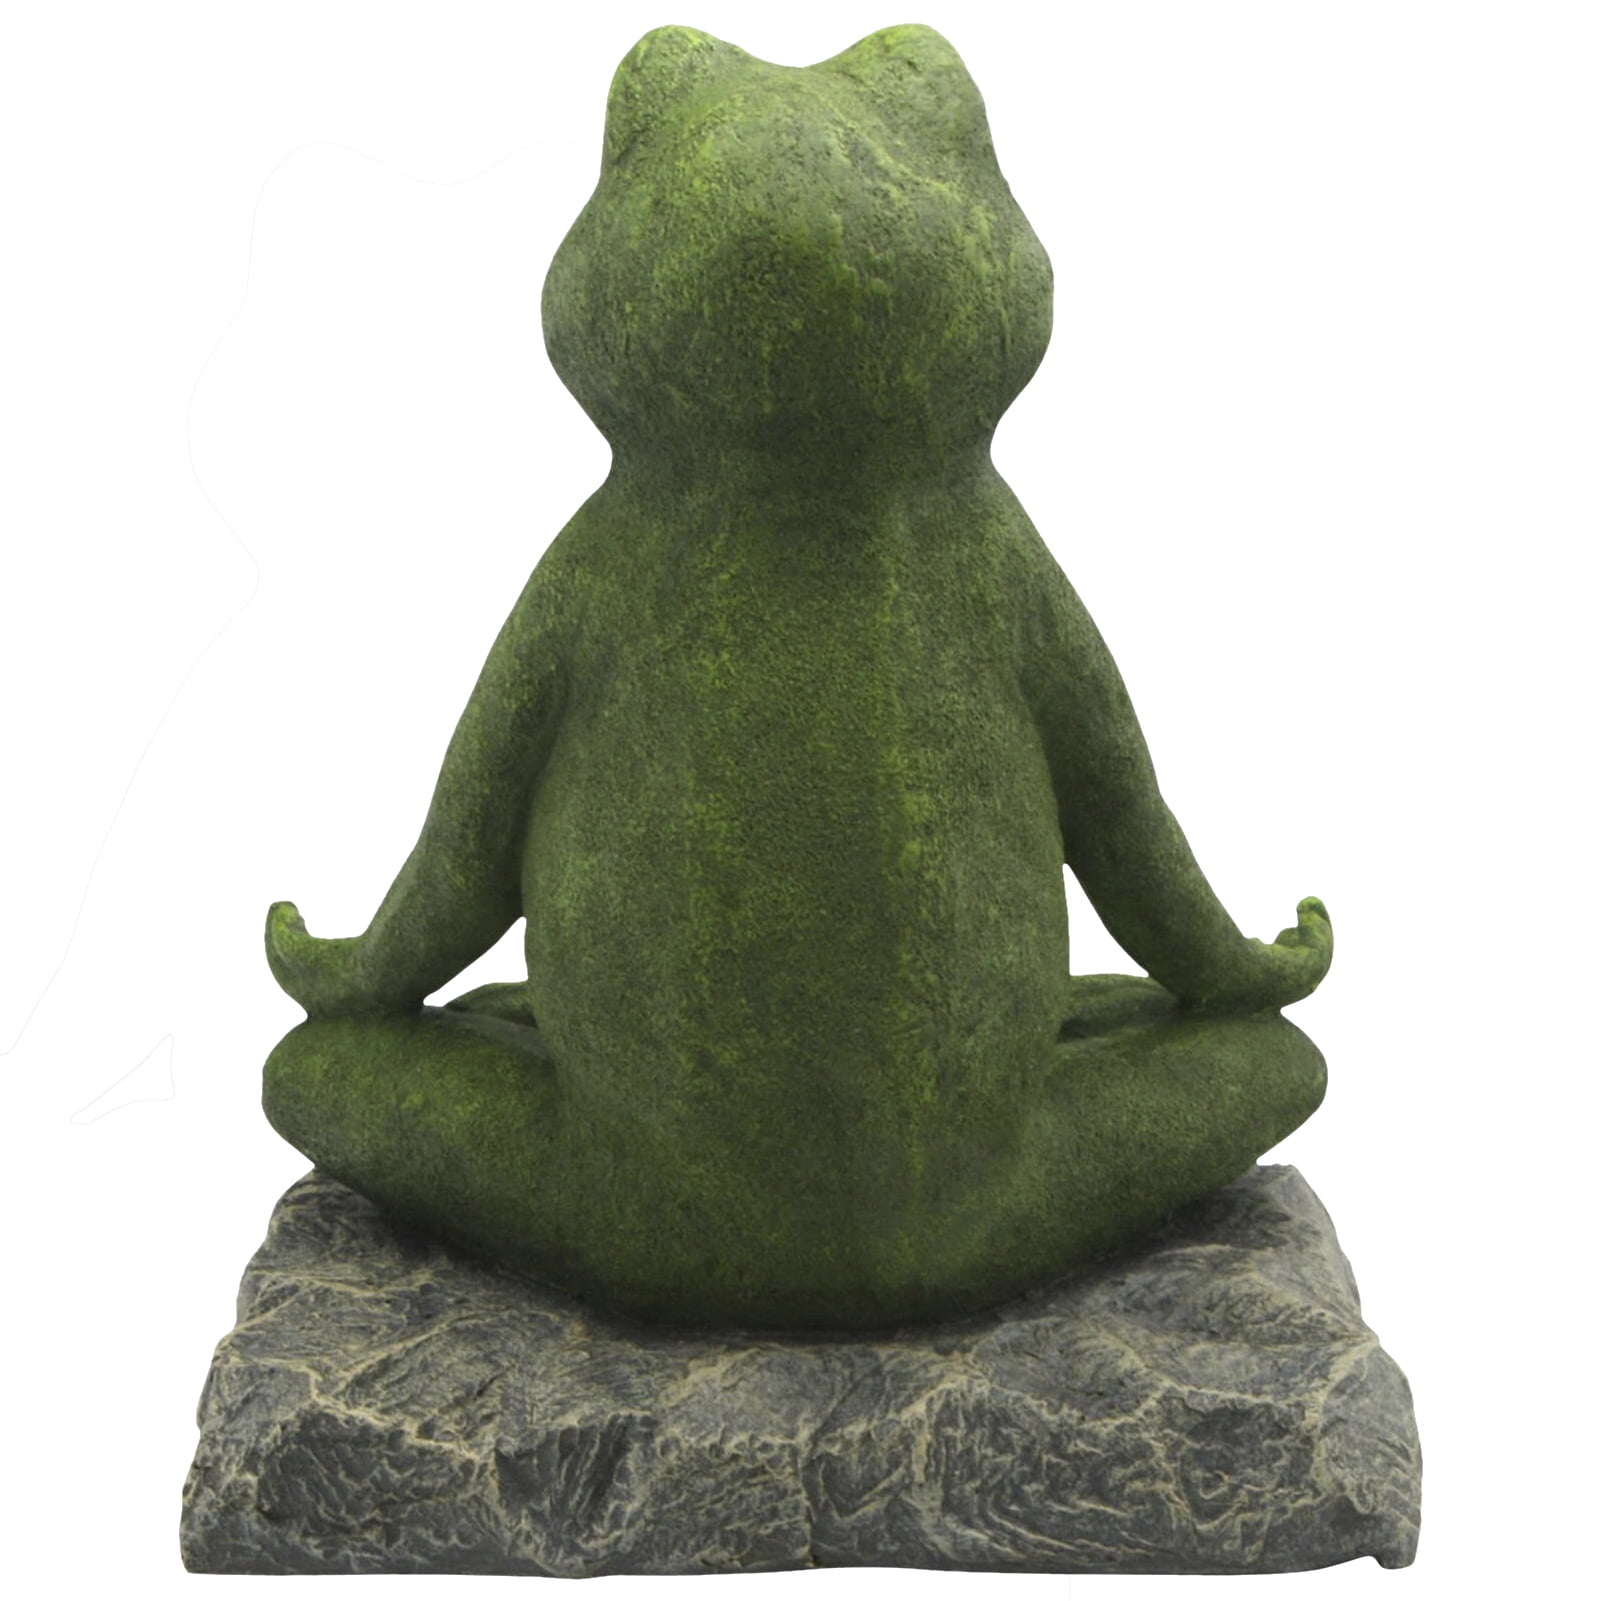 Details about   Buddha Statue Sculpture Green Resin Buddhism Resin Use for Gift Home Decoration